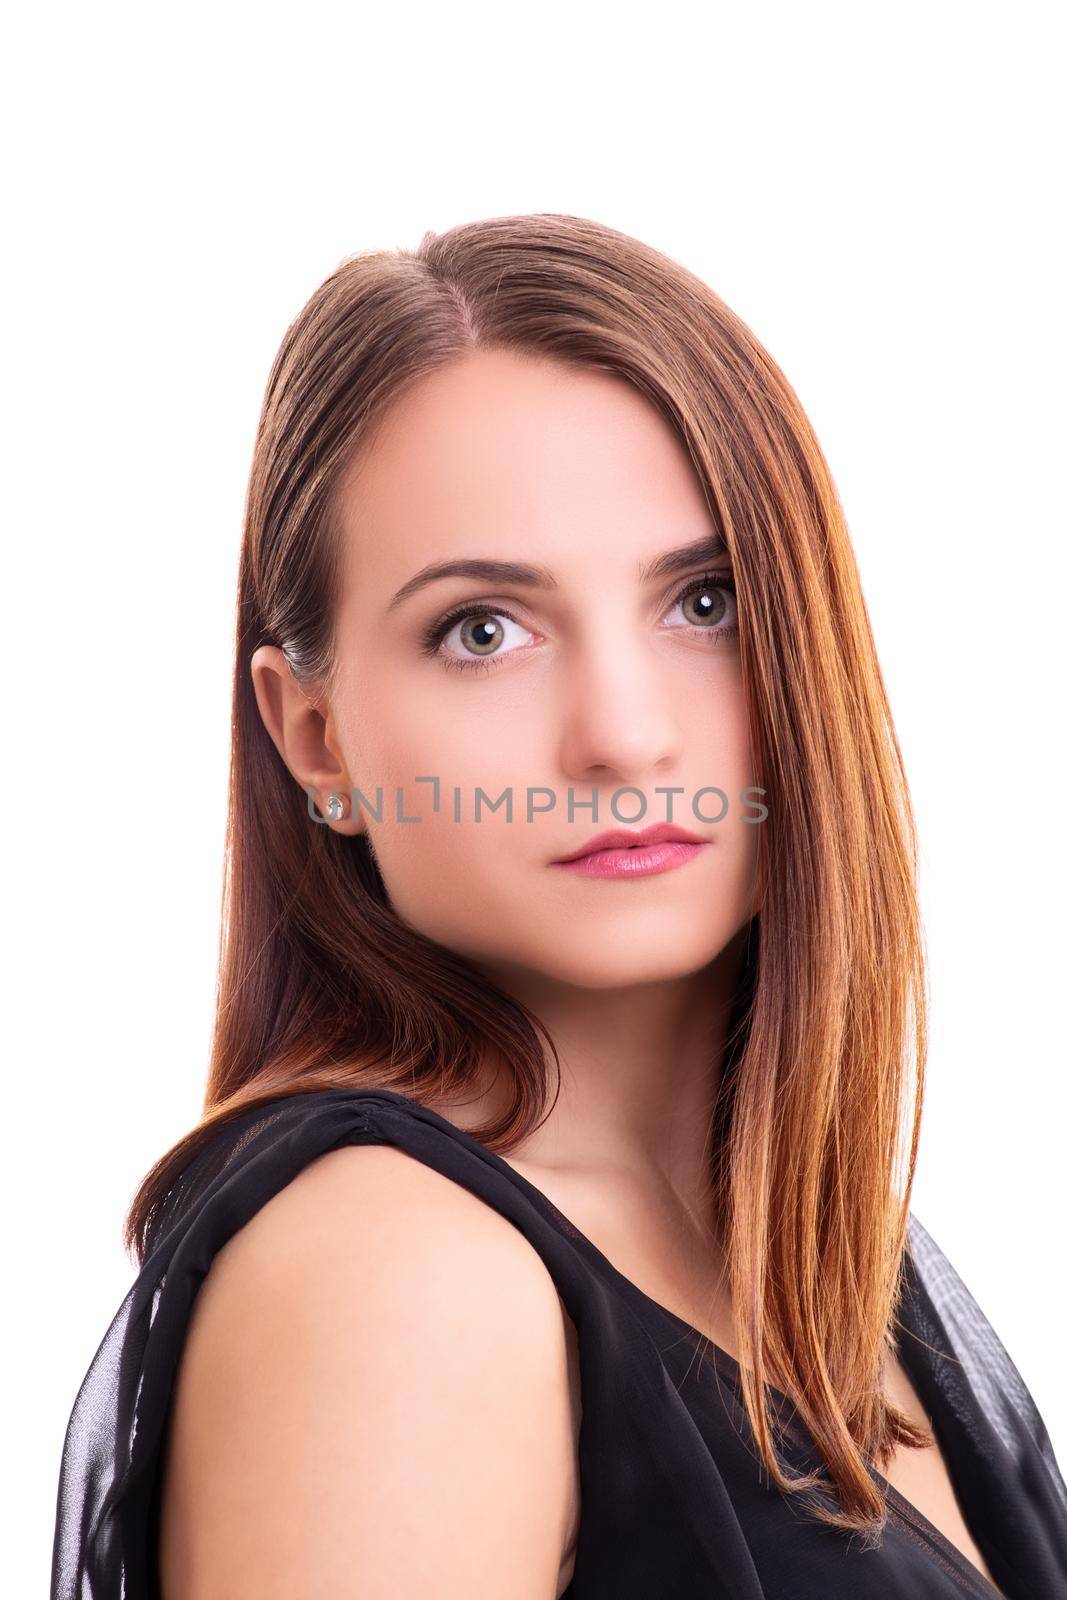 Close up portrait of a beautiful young woman in an elegant black blouse, looking directly at the camera, isolated on white background. Fashion, makeup, model, elegance concept.